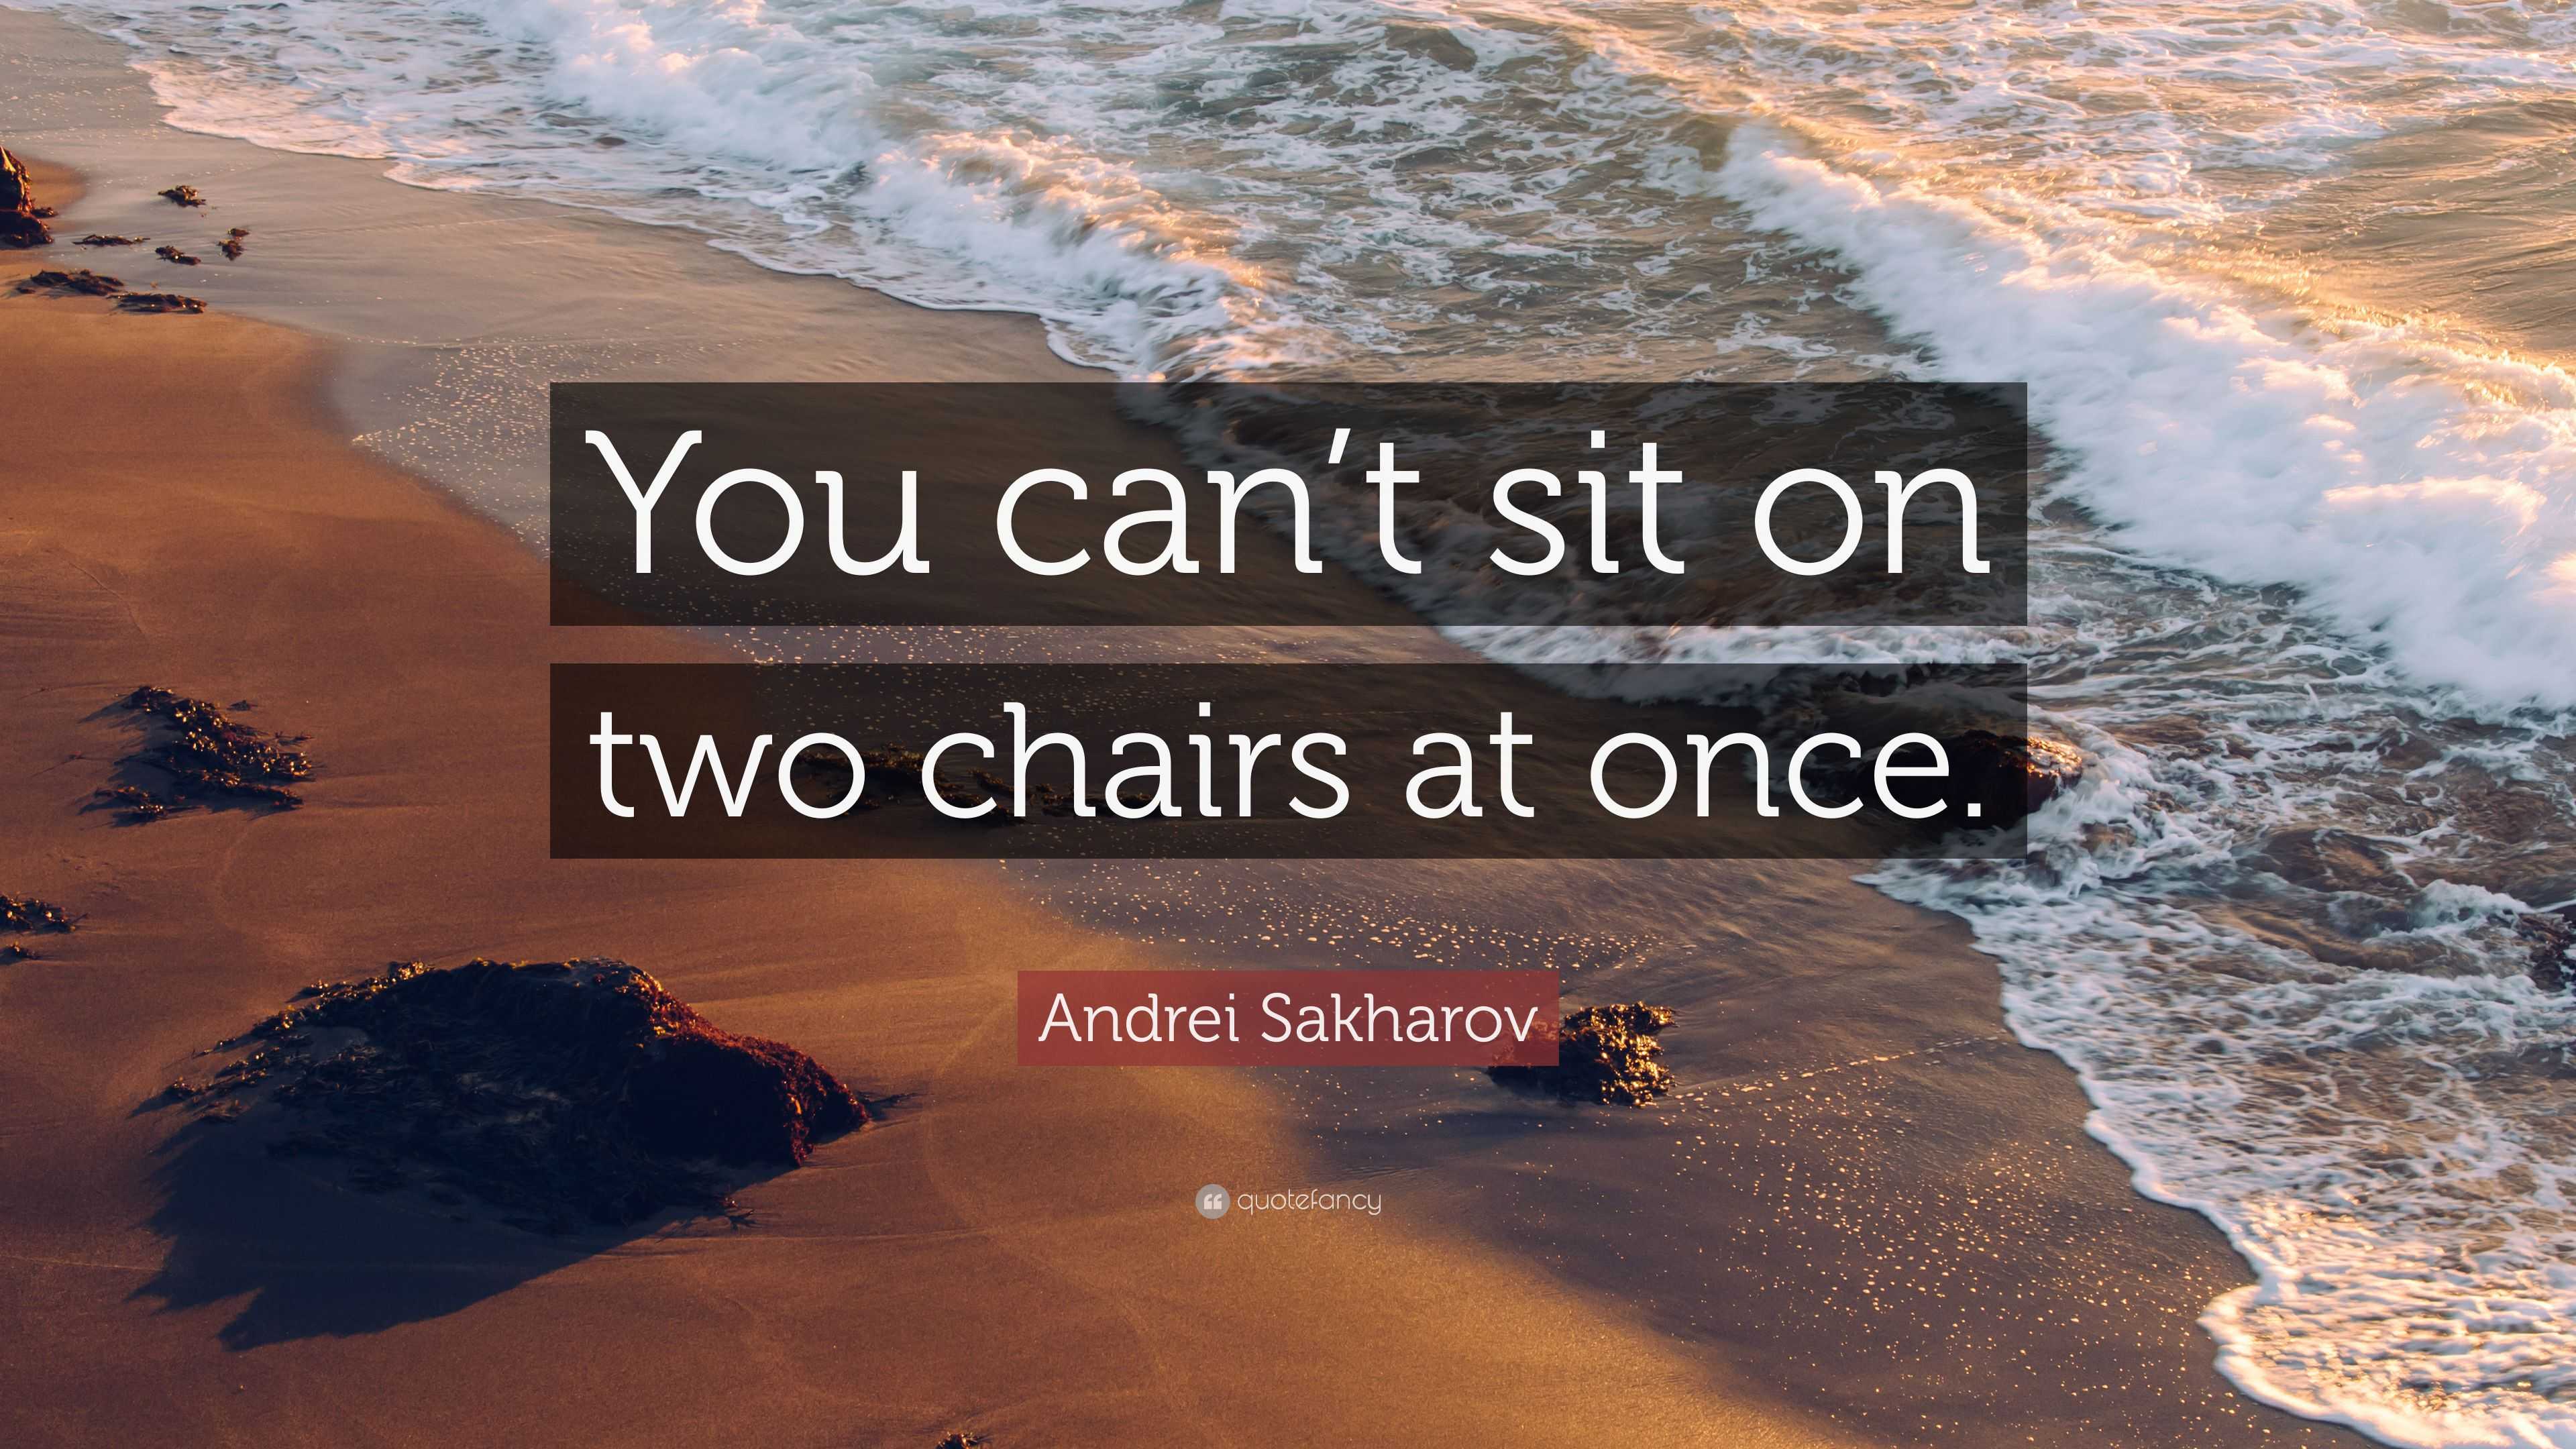 Andrei Sakharov Quote: “You can’t sit on two chairs at once.”